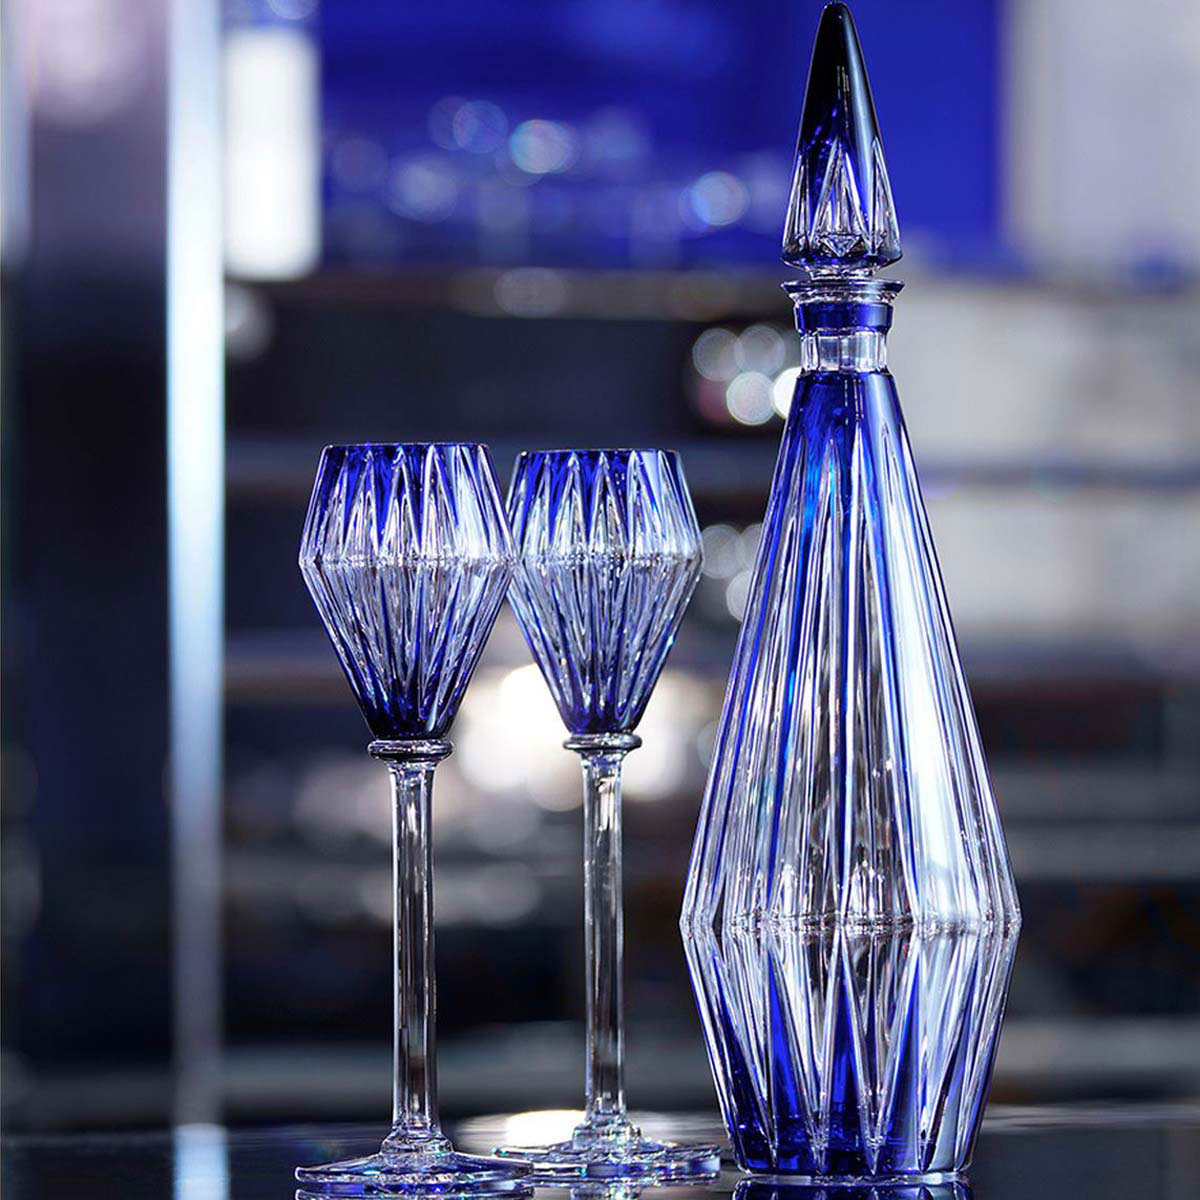 Baccarat Crystal Blue Memoire Chevalier Service Set, Limited Edition of 100, Special Order